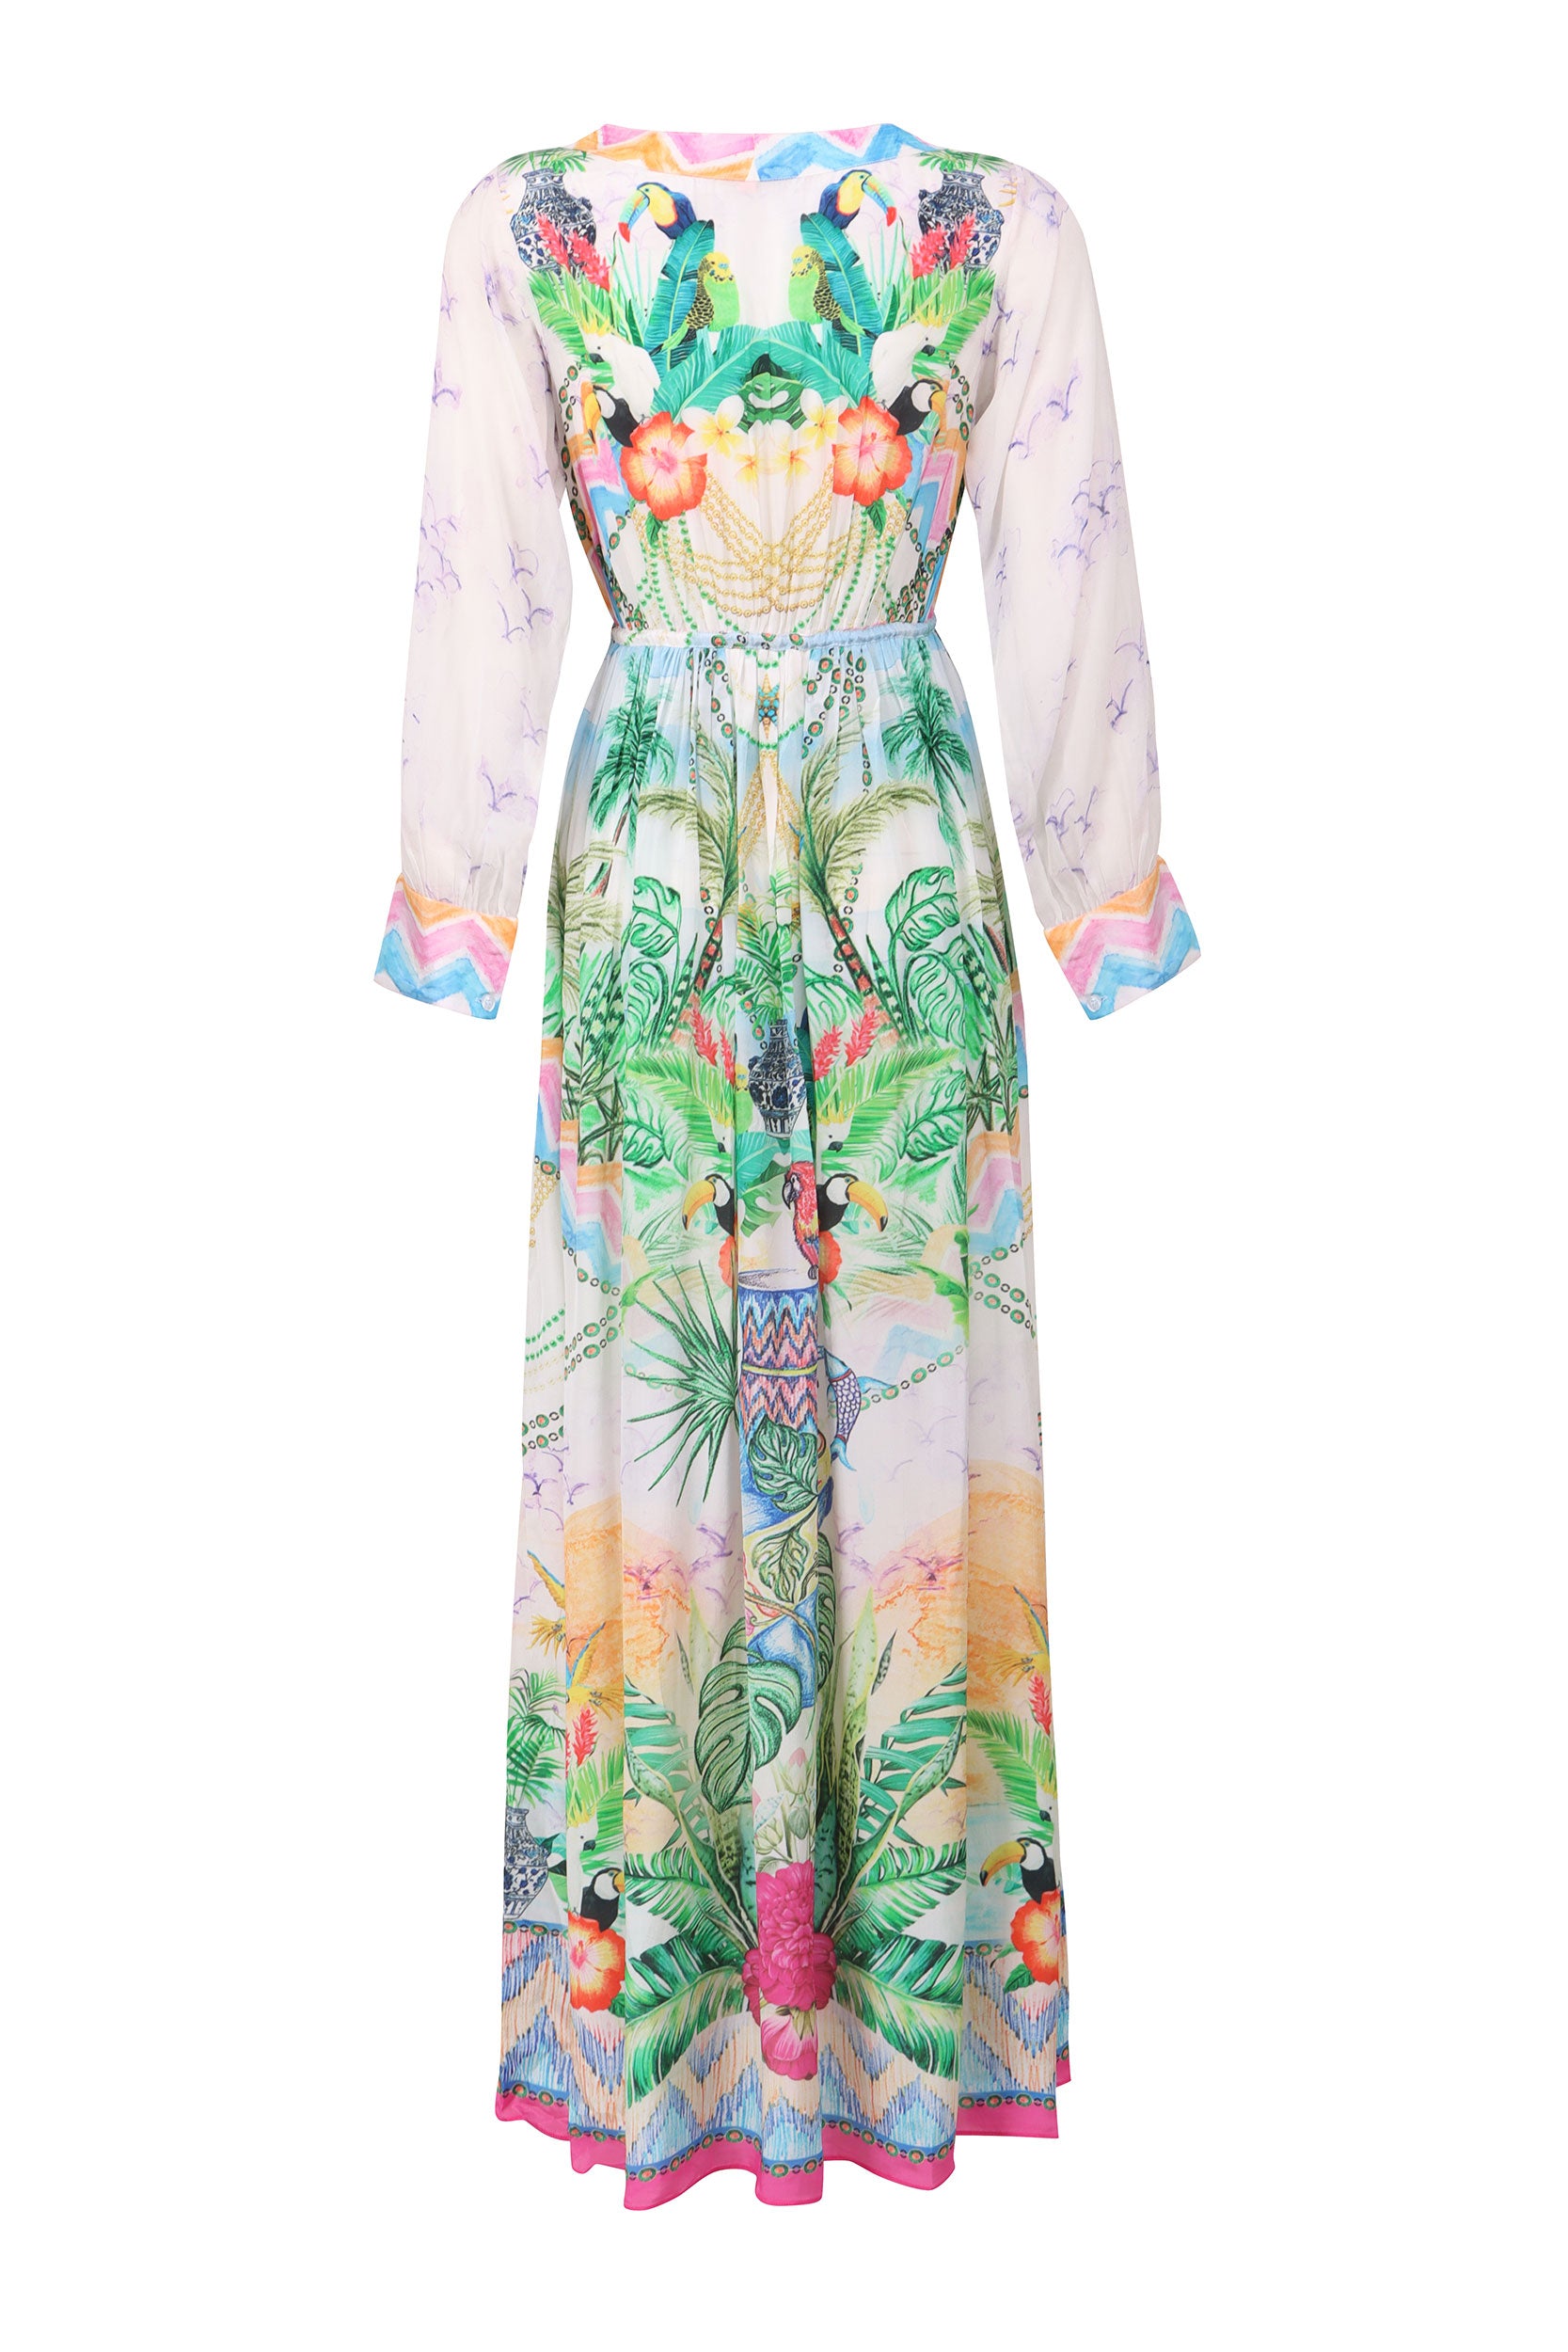 Cool Breeze Summer Print Maxi Dress with Long Sleeves